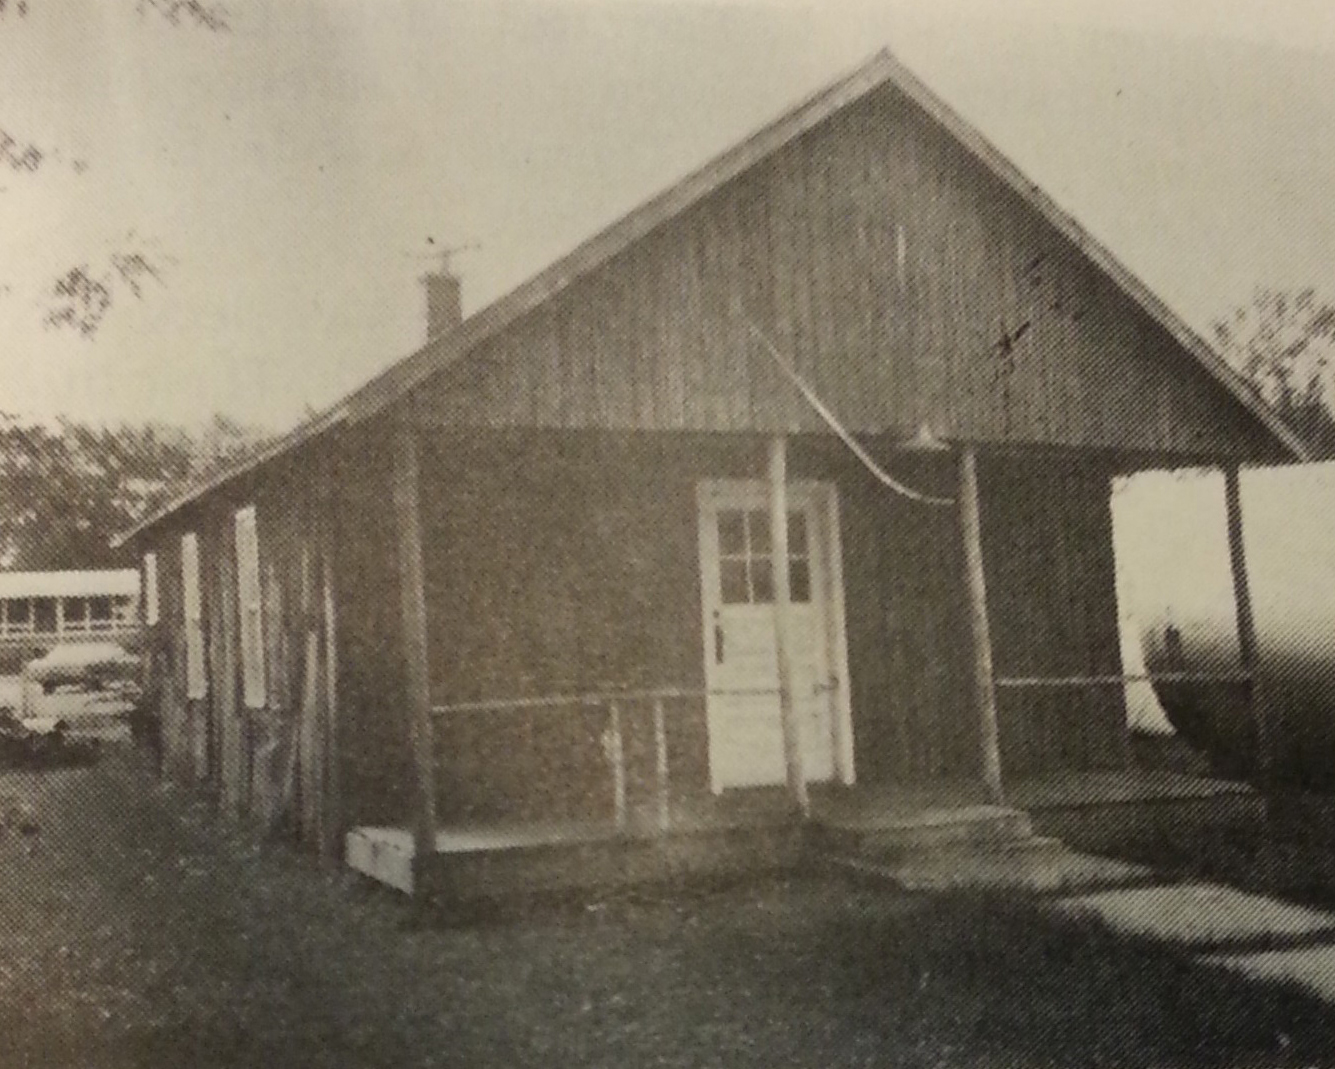 The original Lee F. Pickett American Legion Post in Spencer was erected in 1939.